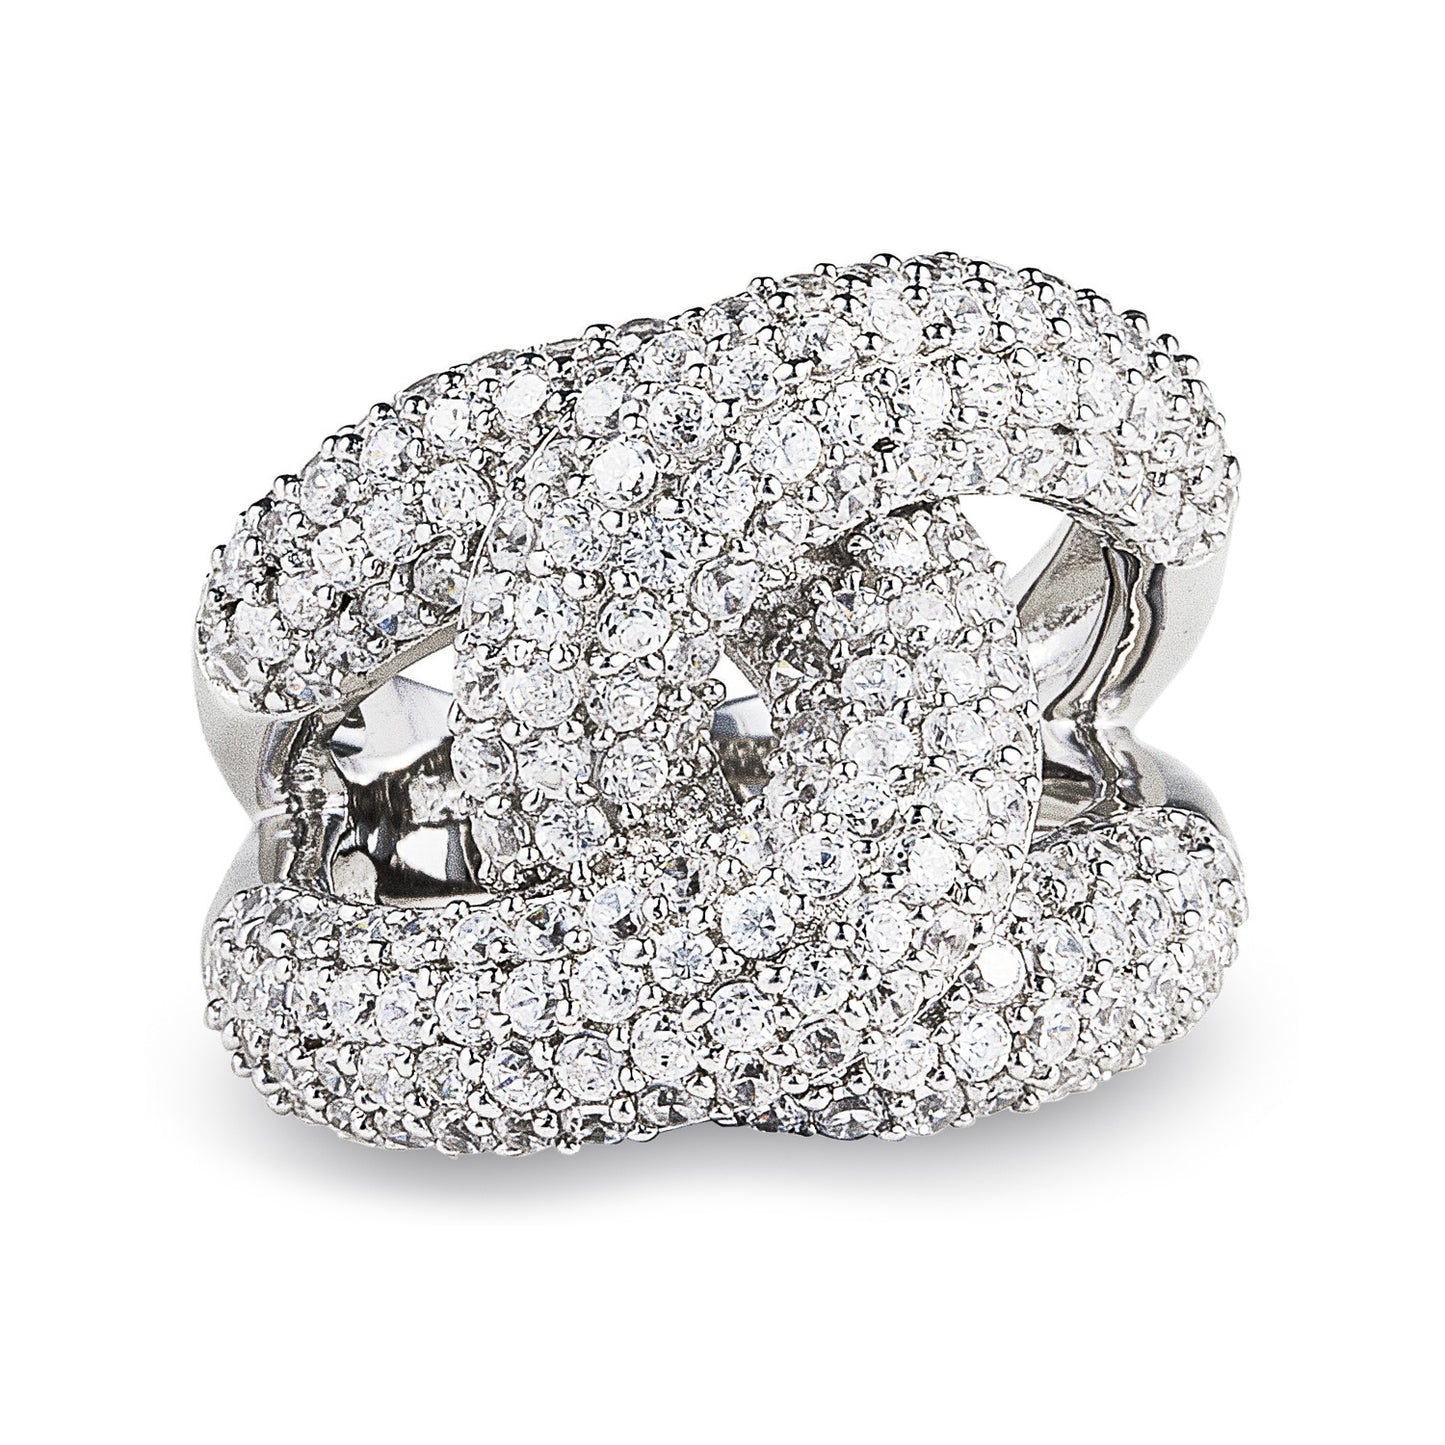 The stunning White Snow Coco Ring in 925 sterling silver features an overlapping knot design encrusted with cubic zirconia stones. Worldwide shipping. Affordable luxury jewellery by Bellagio & Co.